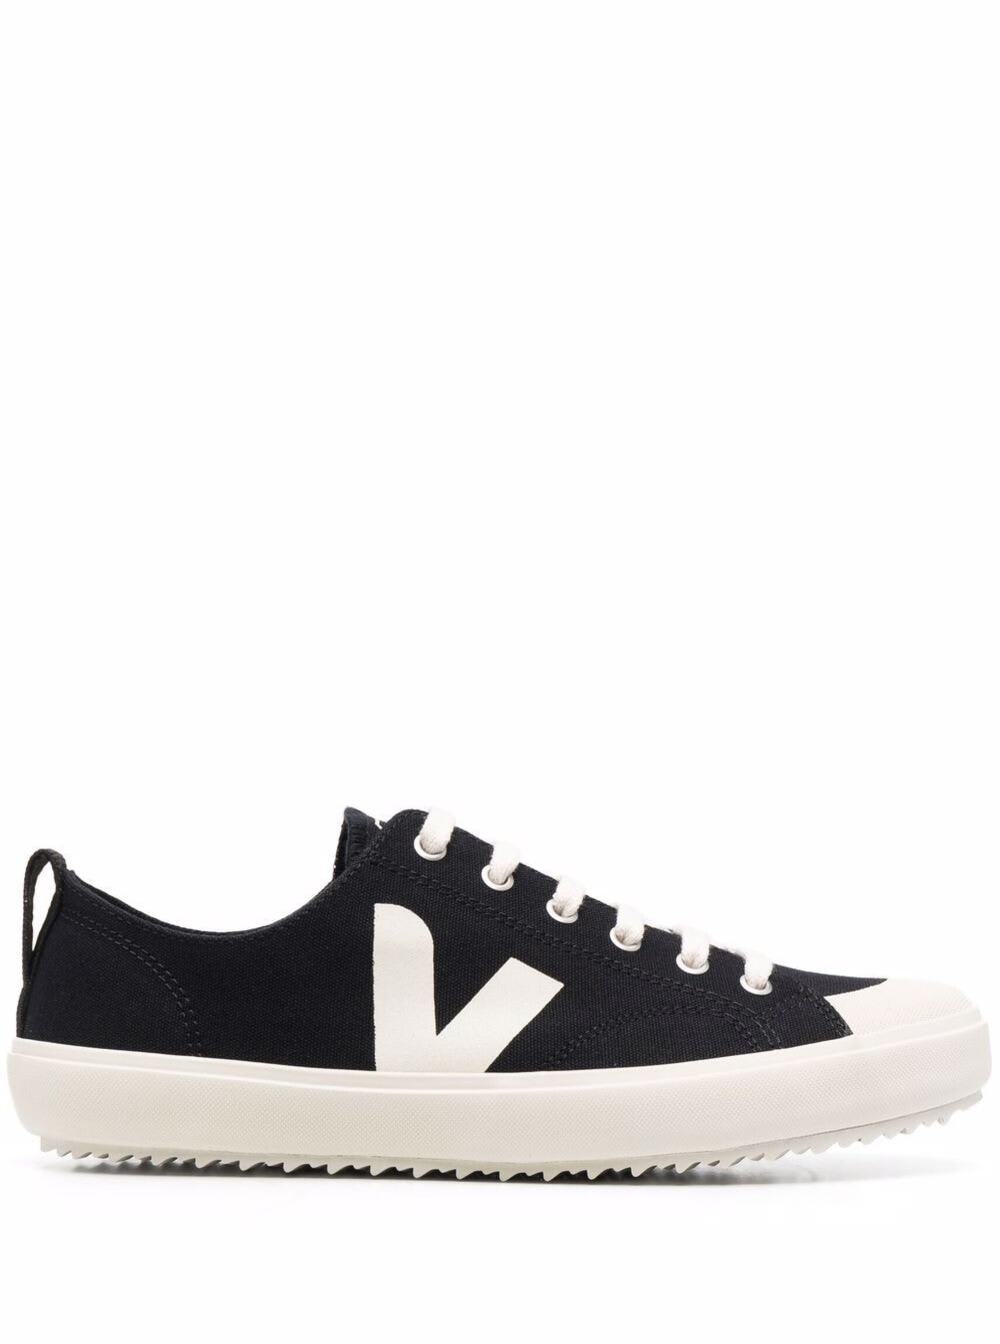 Veja Womans Nova Black And White Fabric Sneakers